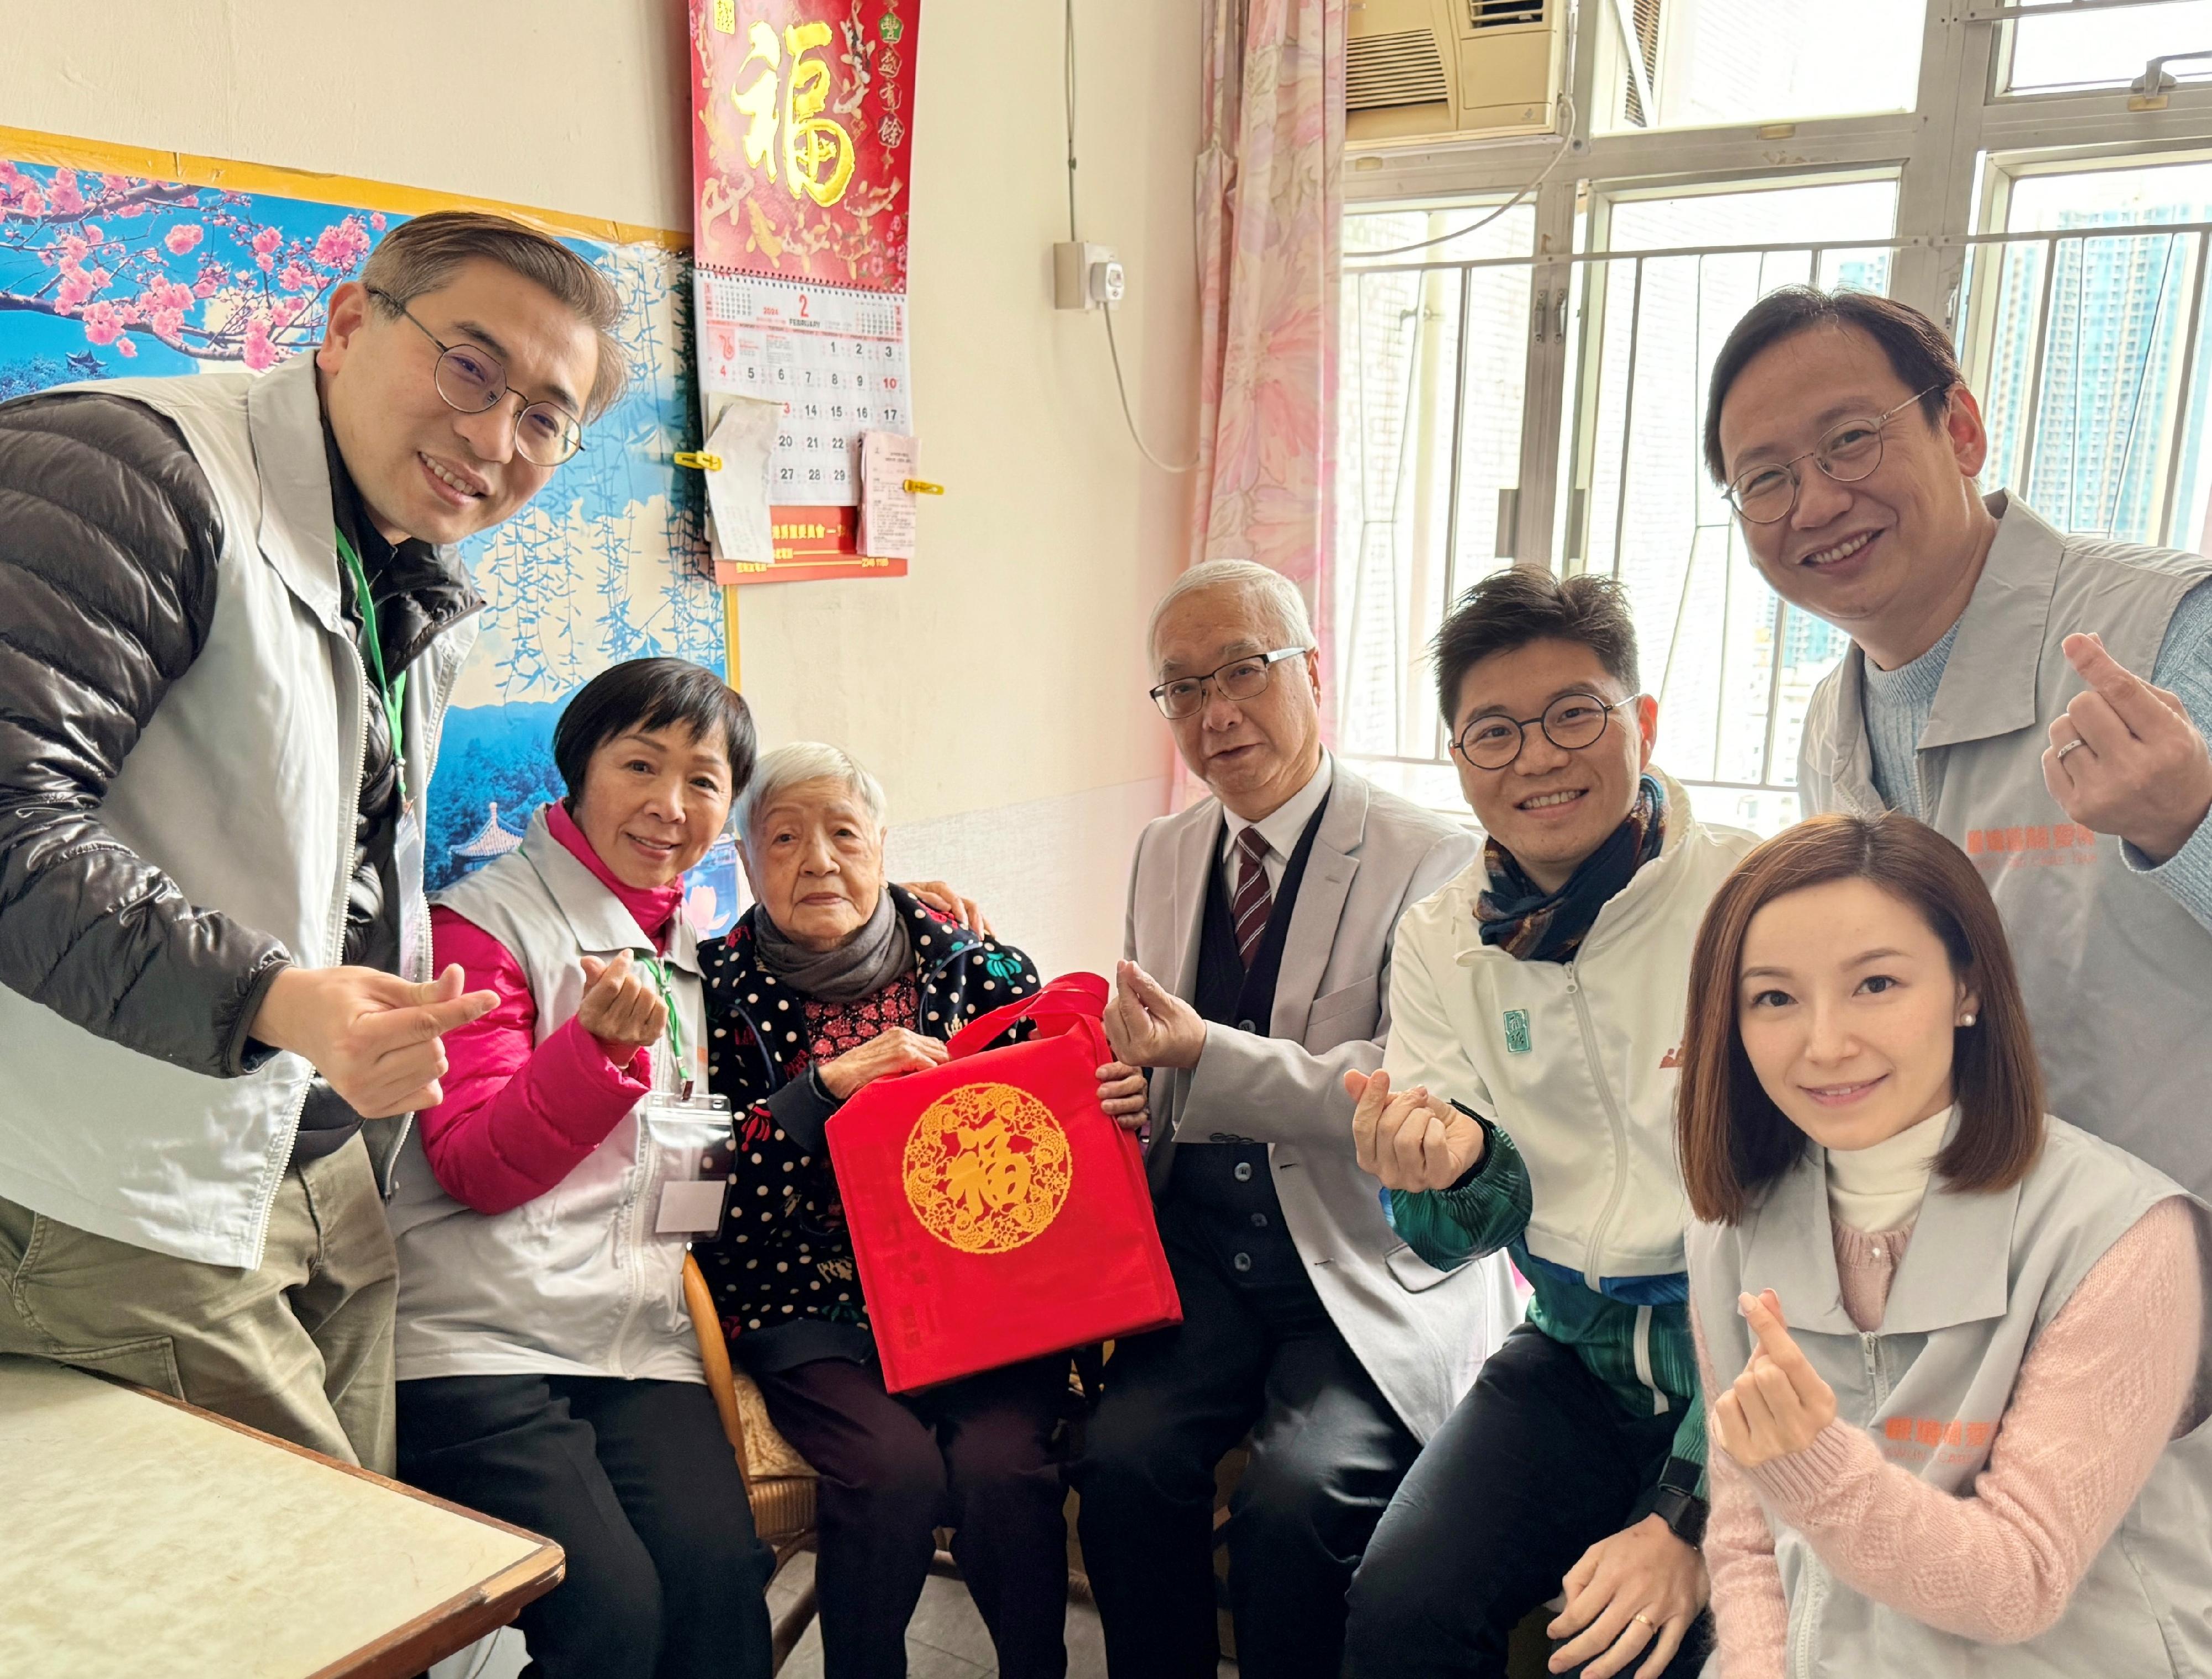 The Secretary for Environment and Ecology, Mr Tse Chin-wan (fourth left), accompanied by the District Officer (Kwun Tong), Mr Denny Ho (fifth left), Kwun Tong District Council members and representatives from the Care Team (Kwun Tong), visited an elderly person living in Tsui Ping (South) Estate, Kwun Tong, today (February 9).